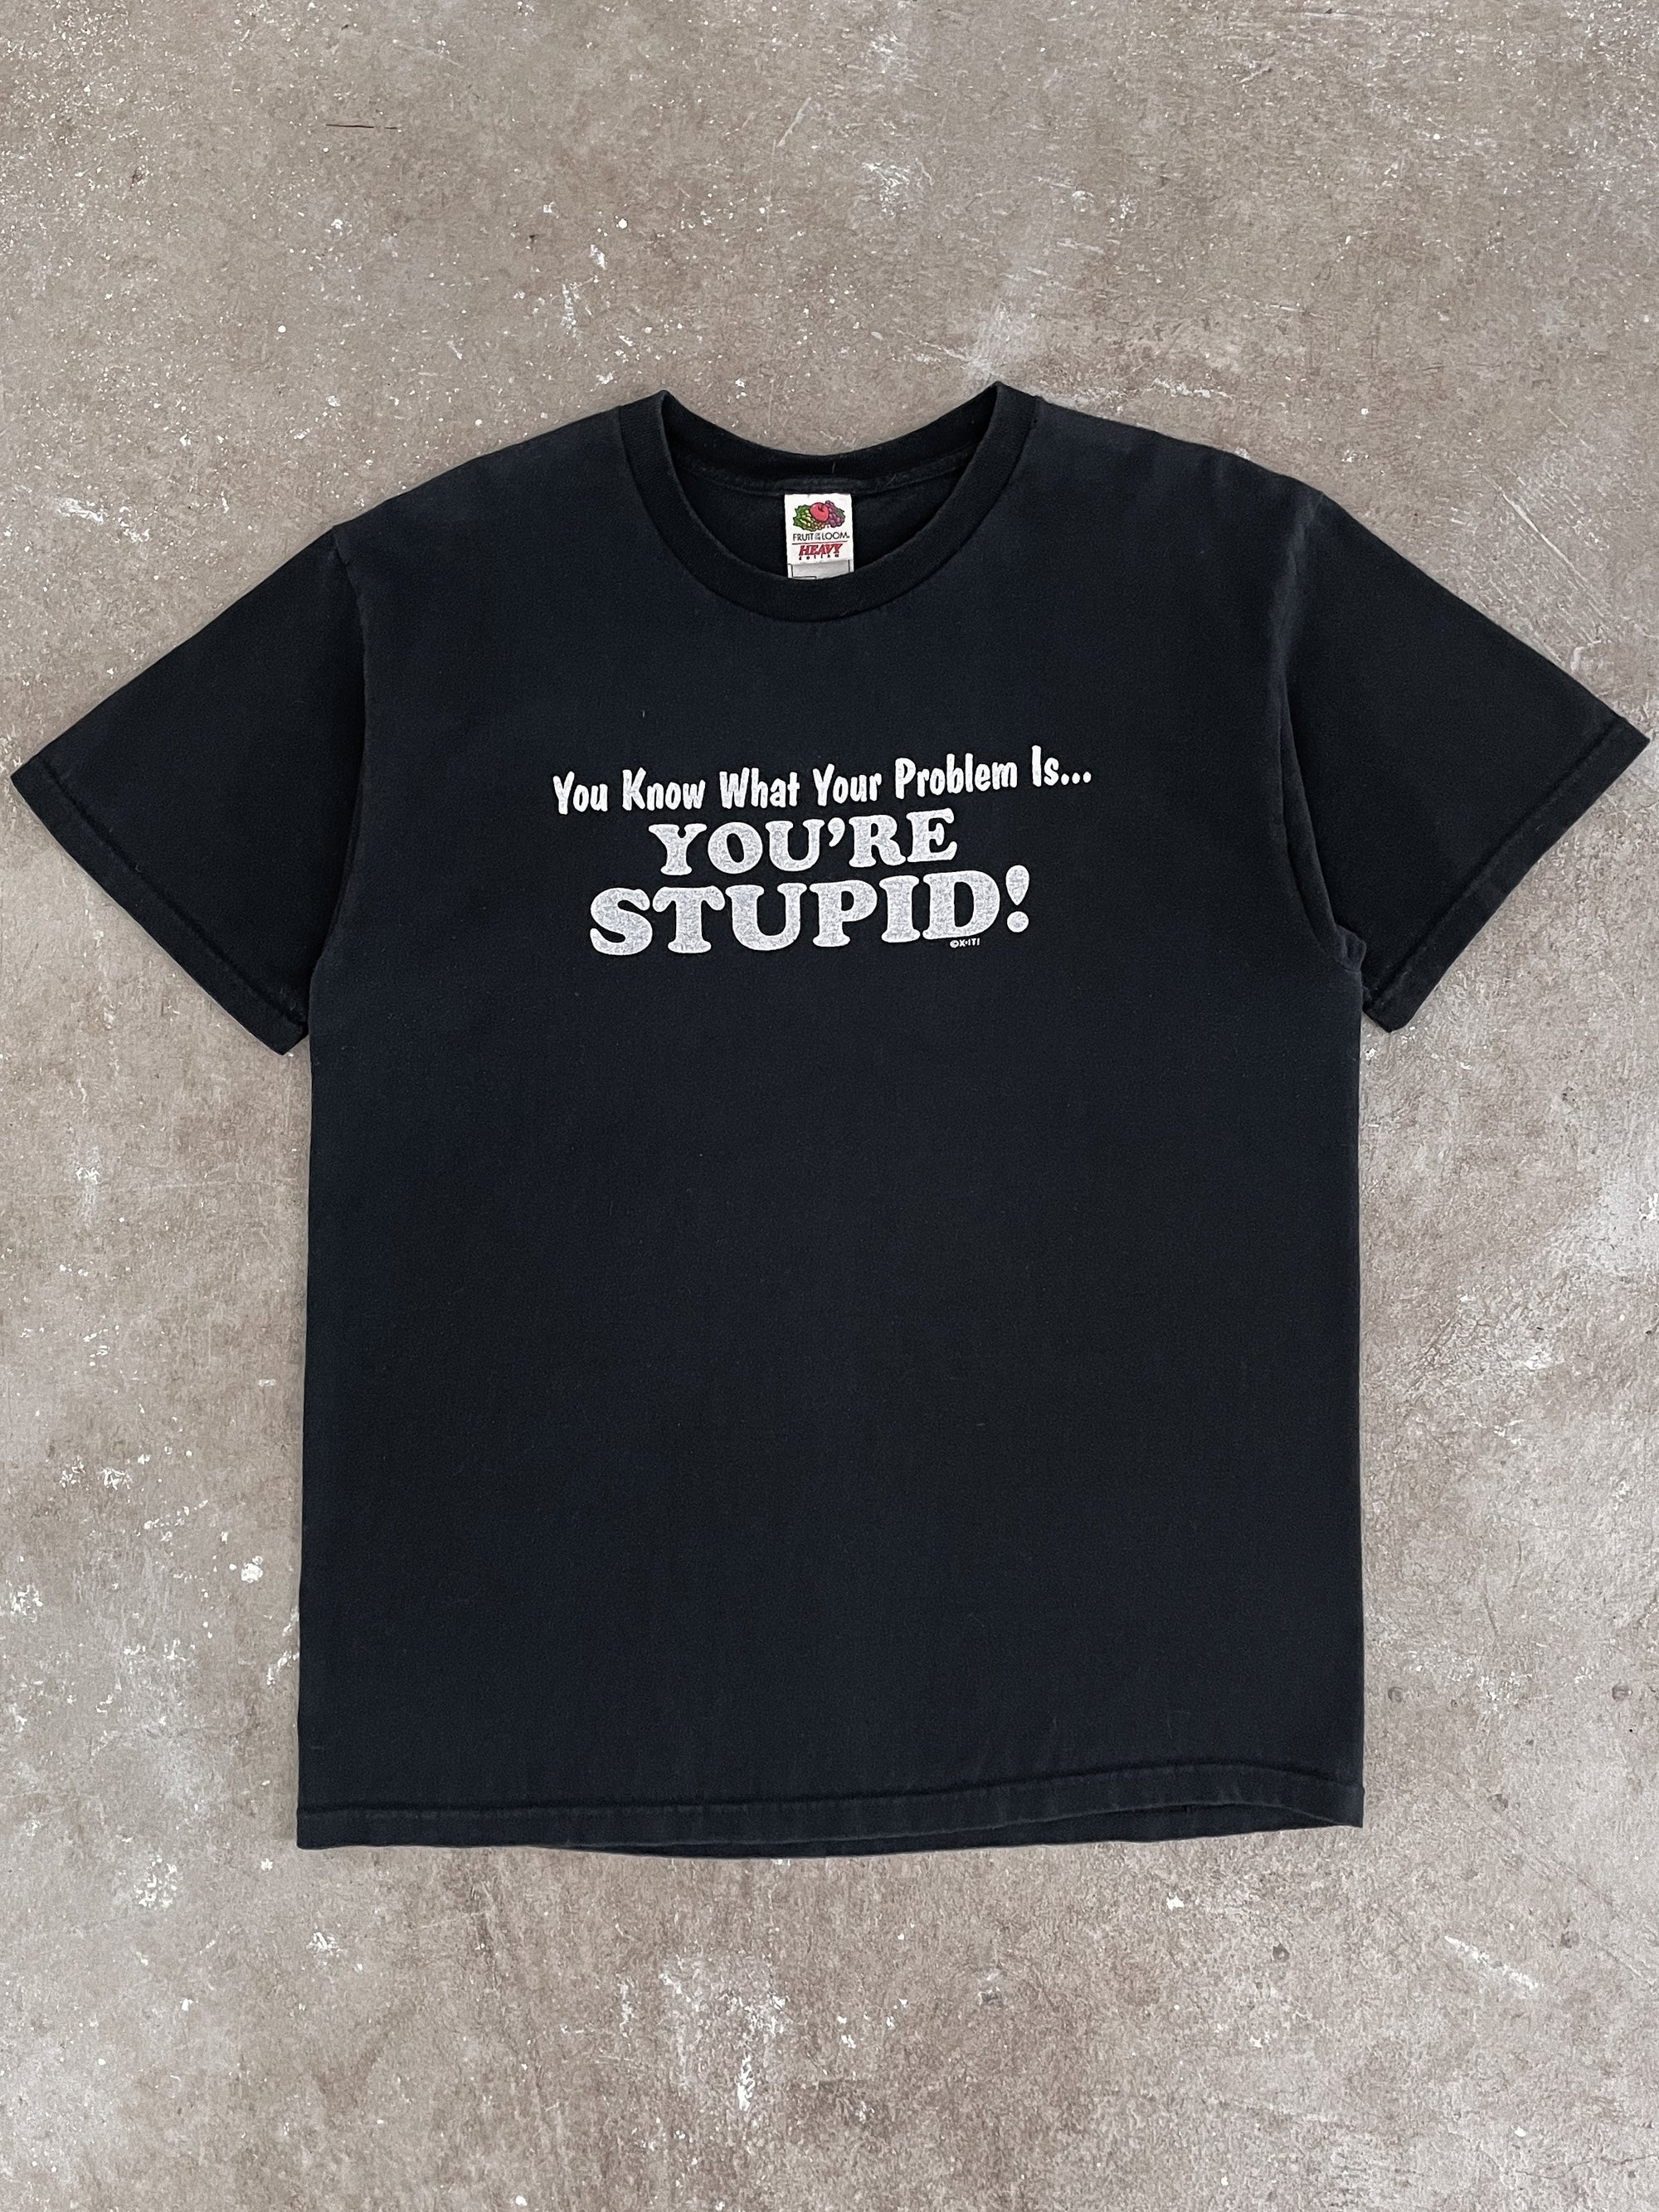 2000s “You’re Stupid!” Tee (M/L)